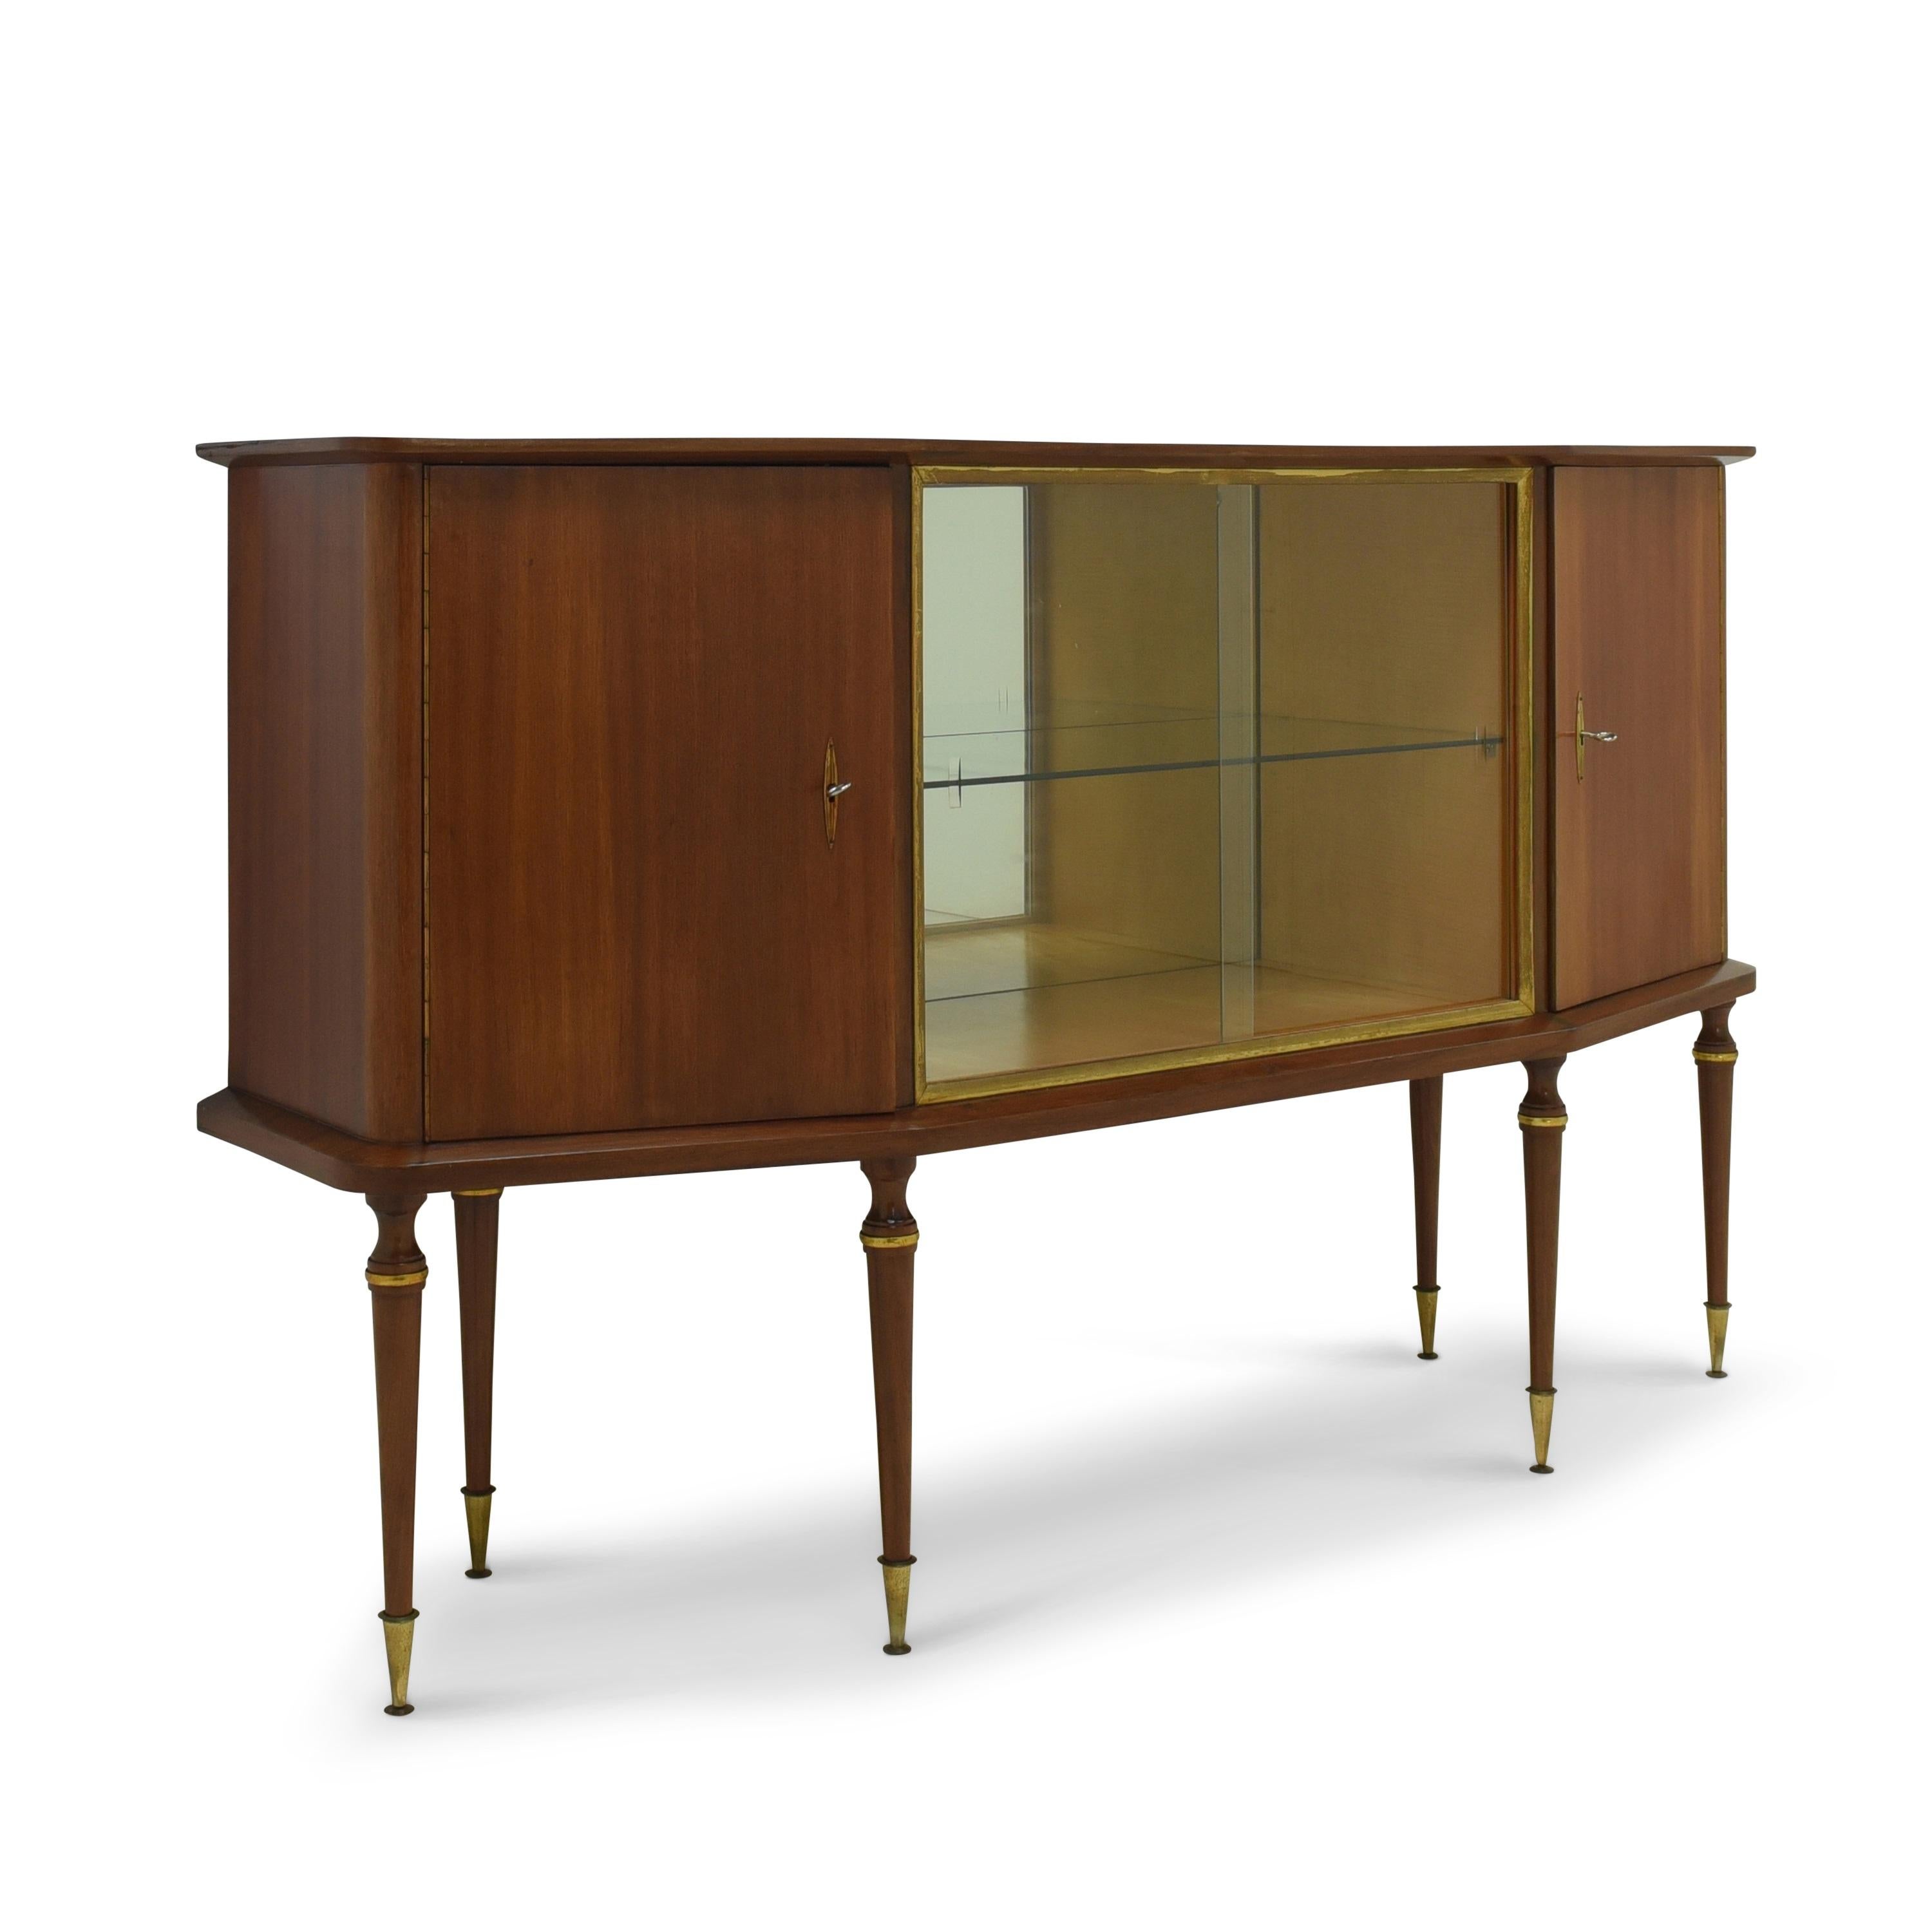 Mid-century display cabinet sideboard restored circa 1960 sideboard antique retro Art Deco

Features:
Display case mirrored on the back with two sliding doors
Outer doors with original espagnolette locks
Brass-plated metal elements
Original